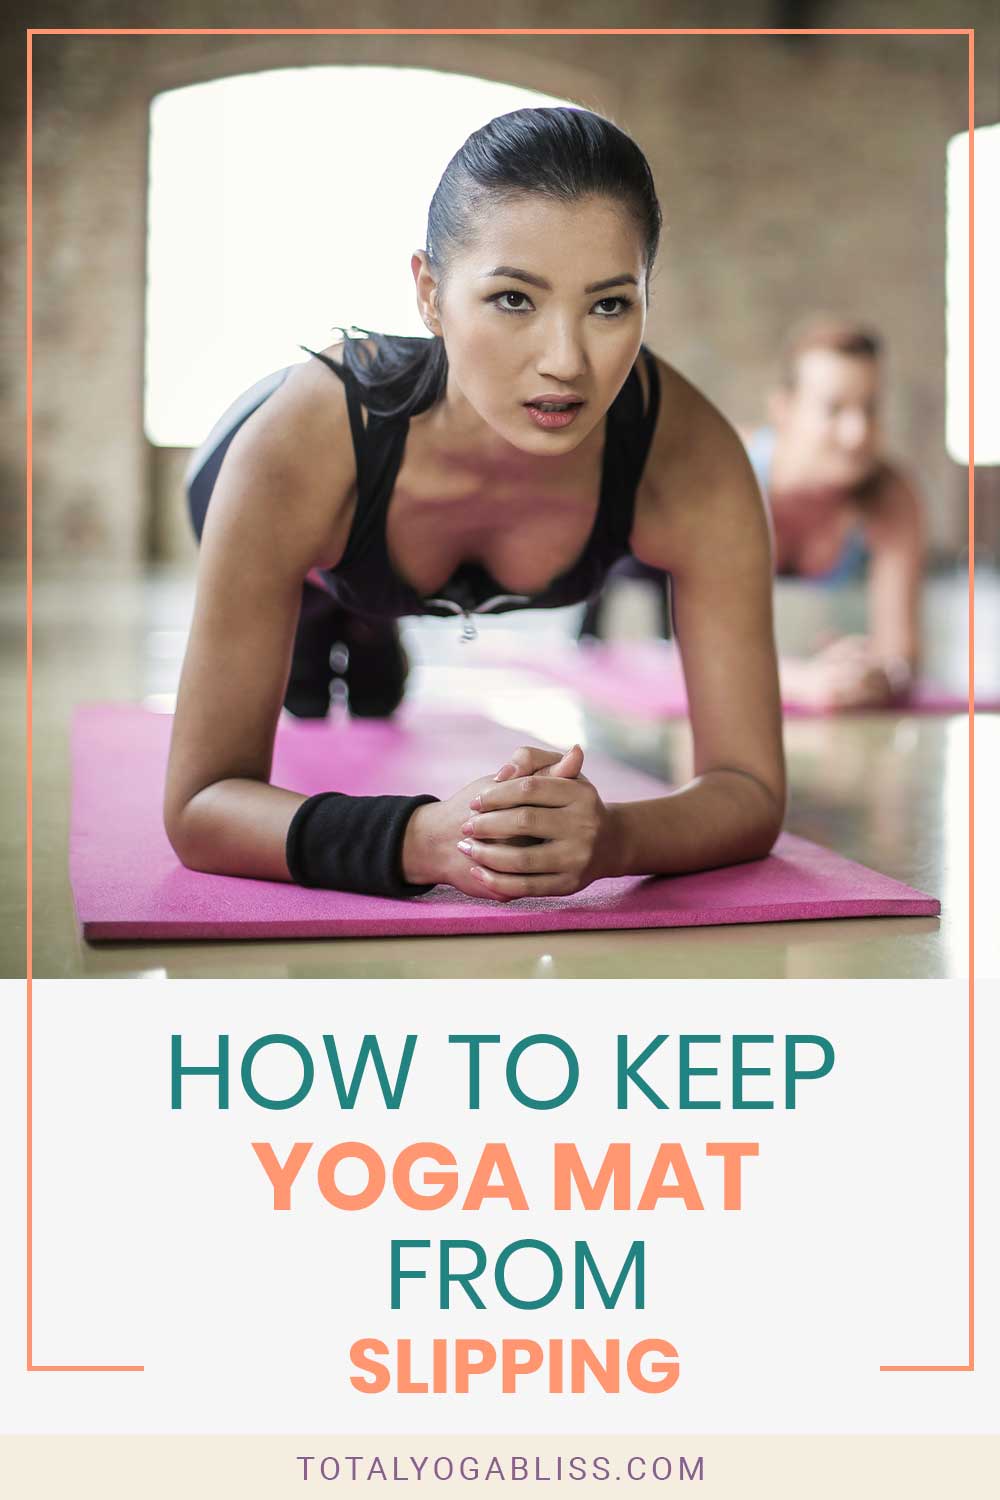 How To Keep Yoga Mat From Slipping